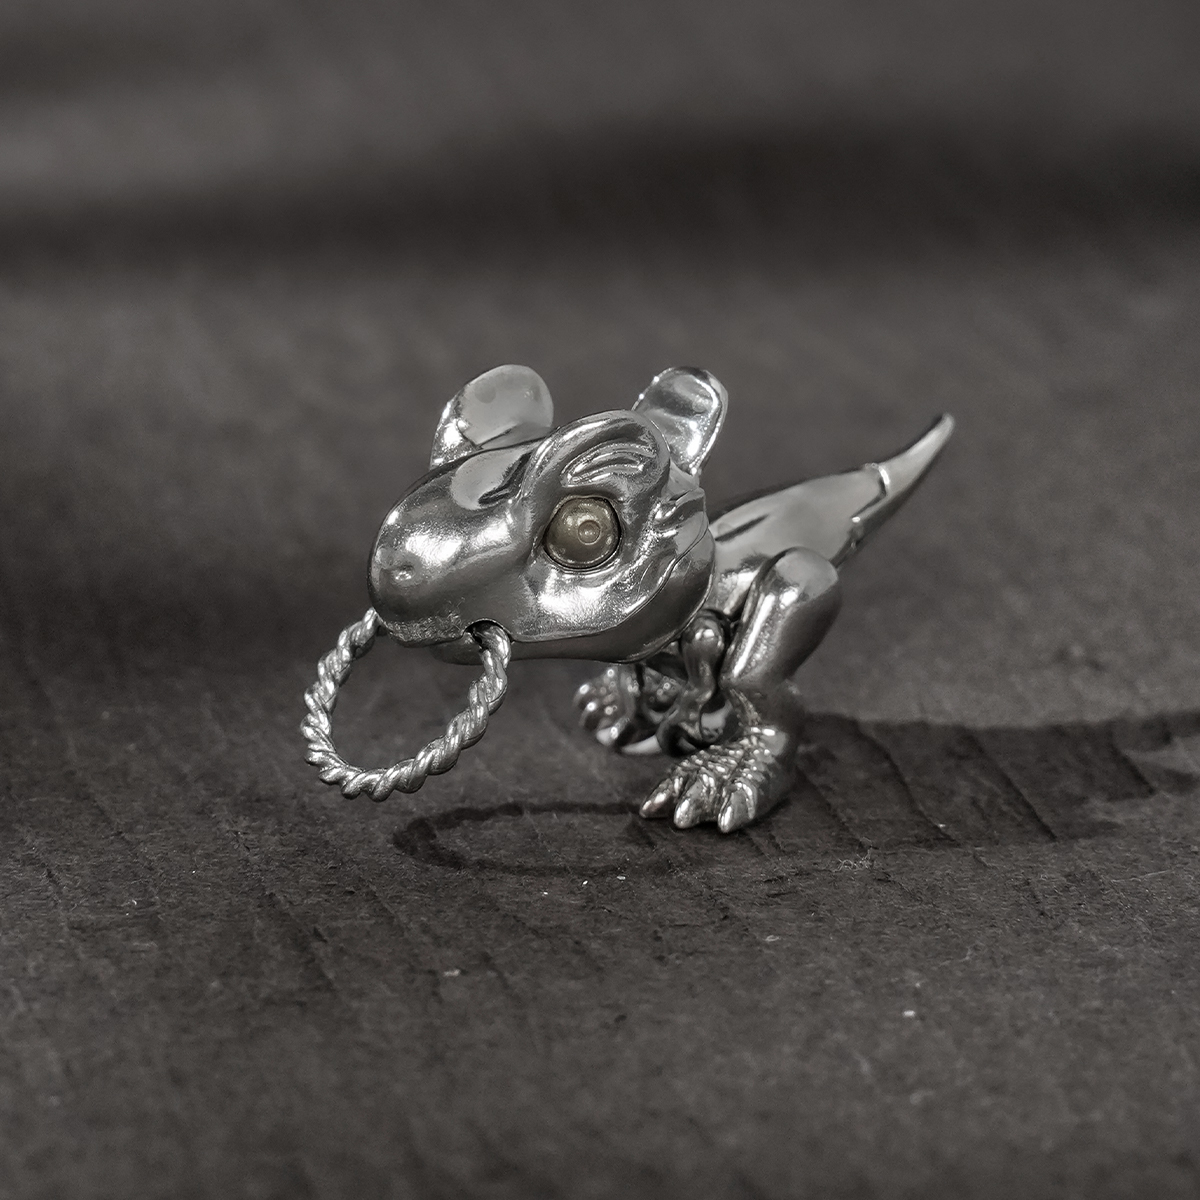 S925 Silver Artistic Dinosaur Retro Pendant with Moveable Limbs and Biteable Mouth